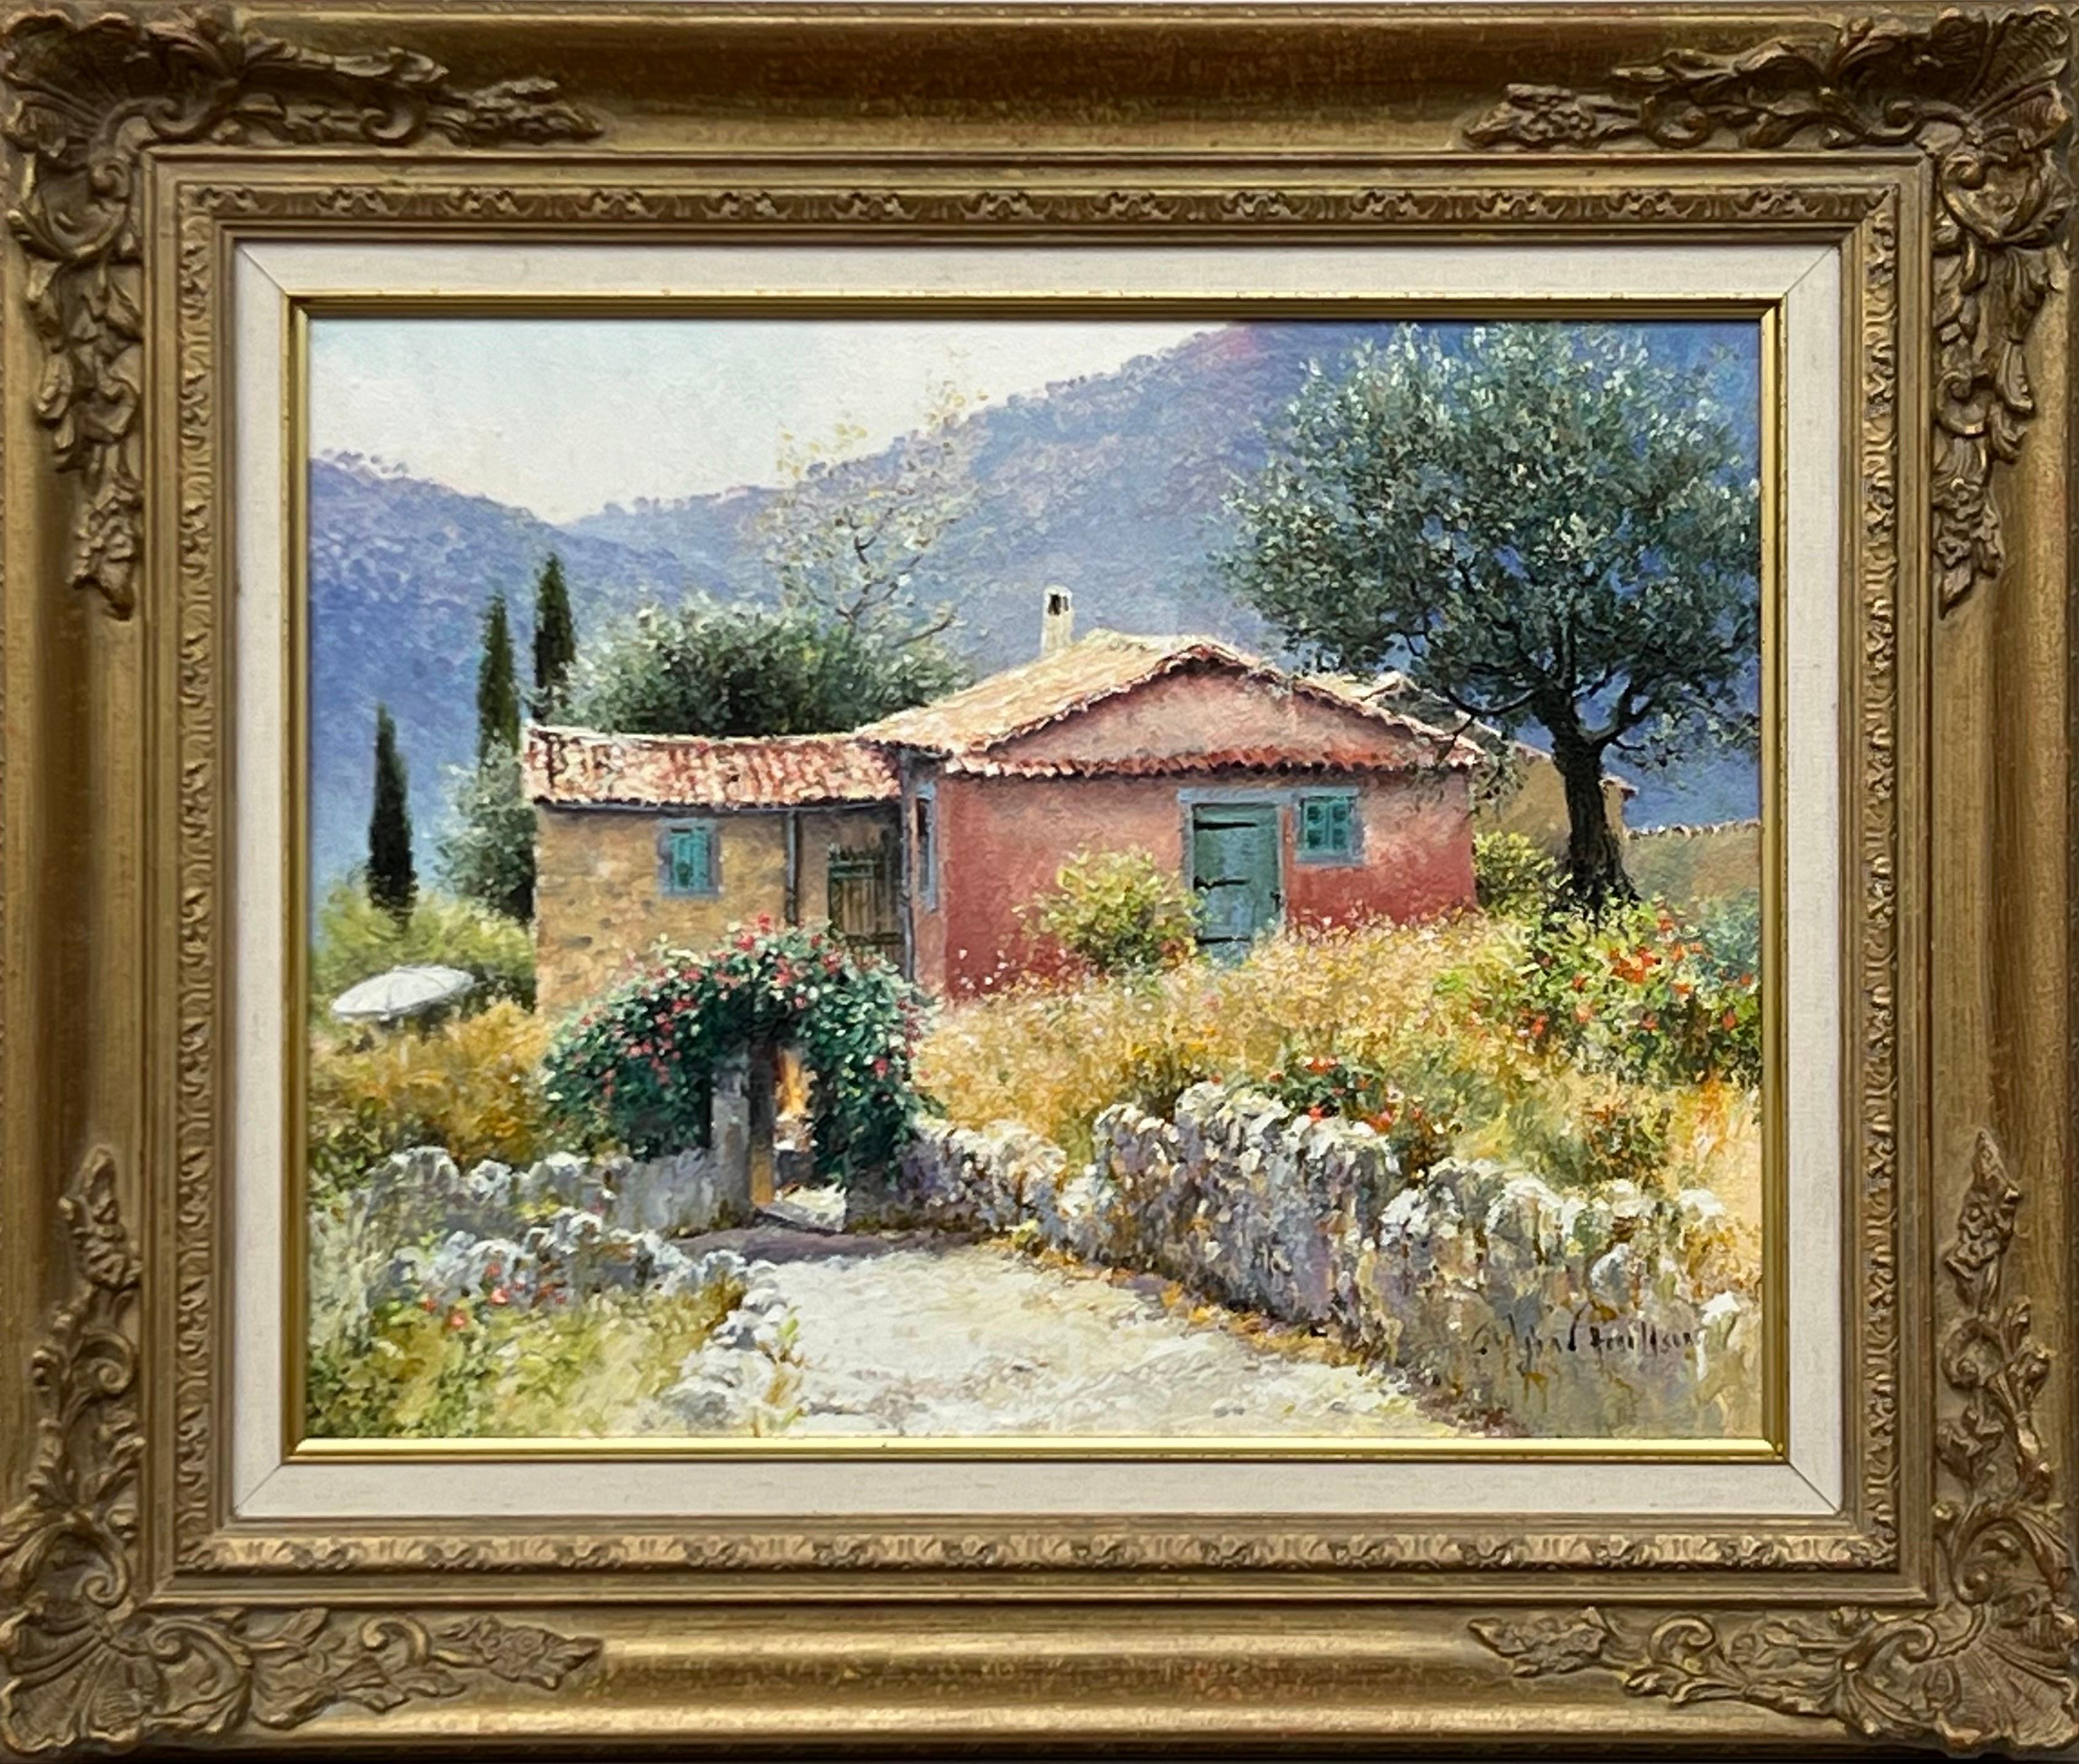 Impressionist Tuscan Cottage Landscape Painting with Flowers & Trees in Italy, entitled “la Maison Rose”. A unique original painting by British Artist John Donaldson. 

Art measures 18 x 14 inches 
Frame measures 25 x 20.5 inches 

This is a